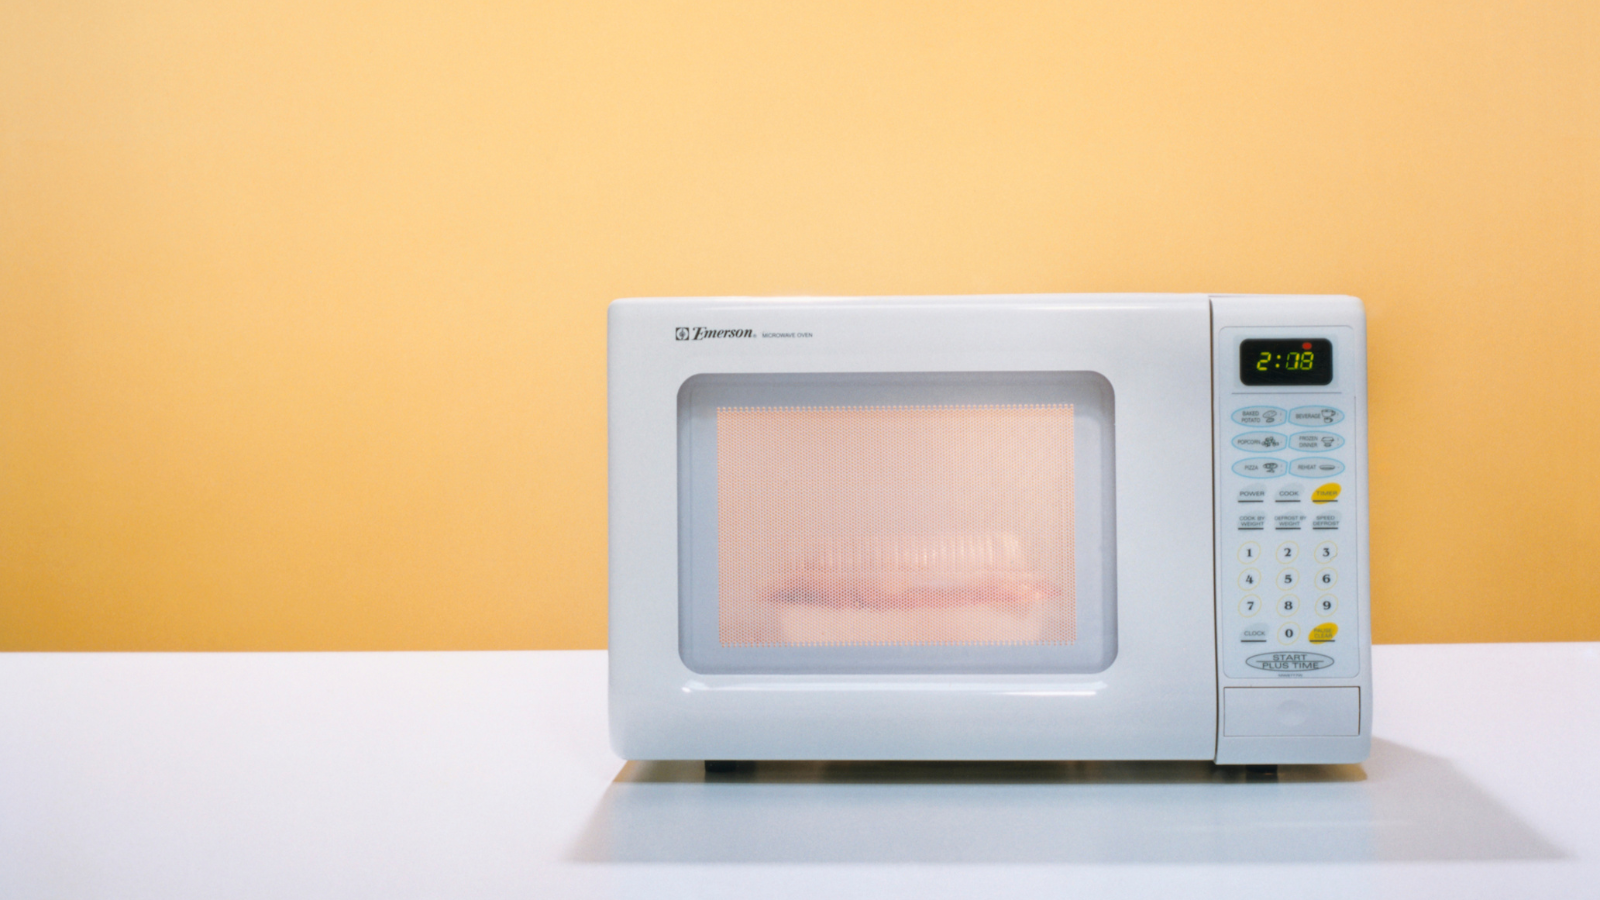 Does microwaving foods in plastic containers release cancer-causing agents into the foods?